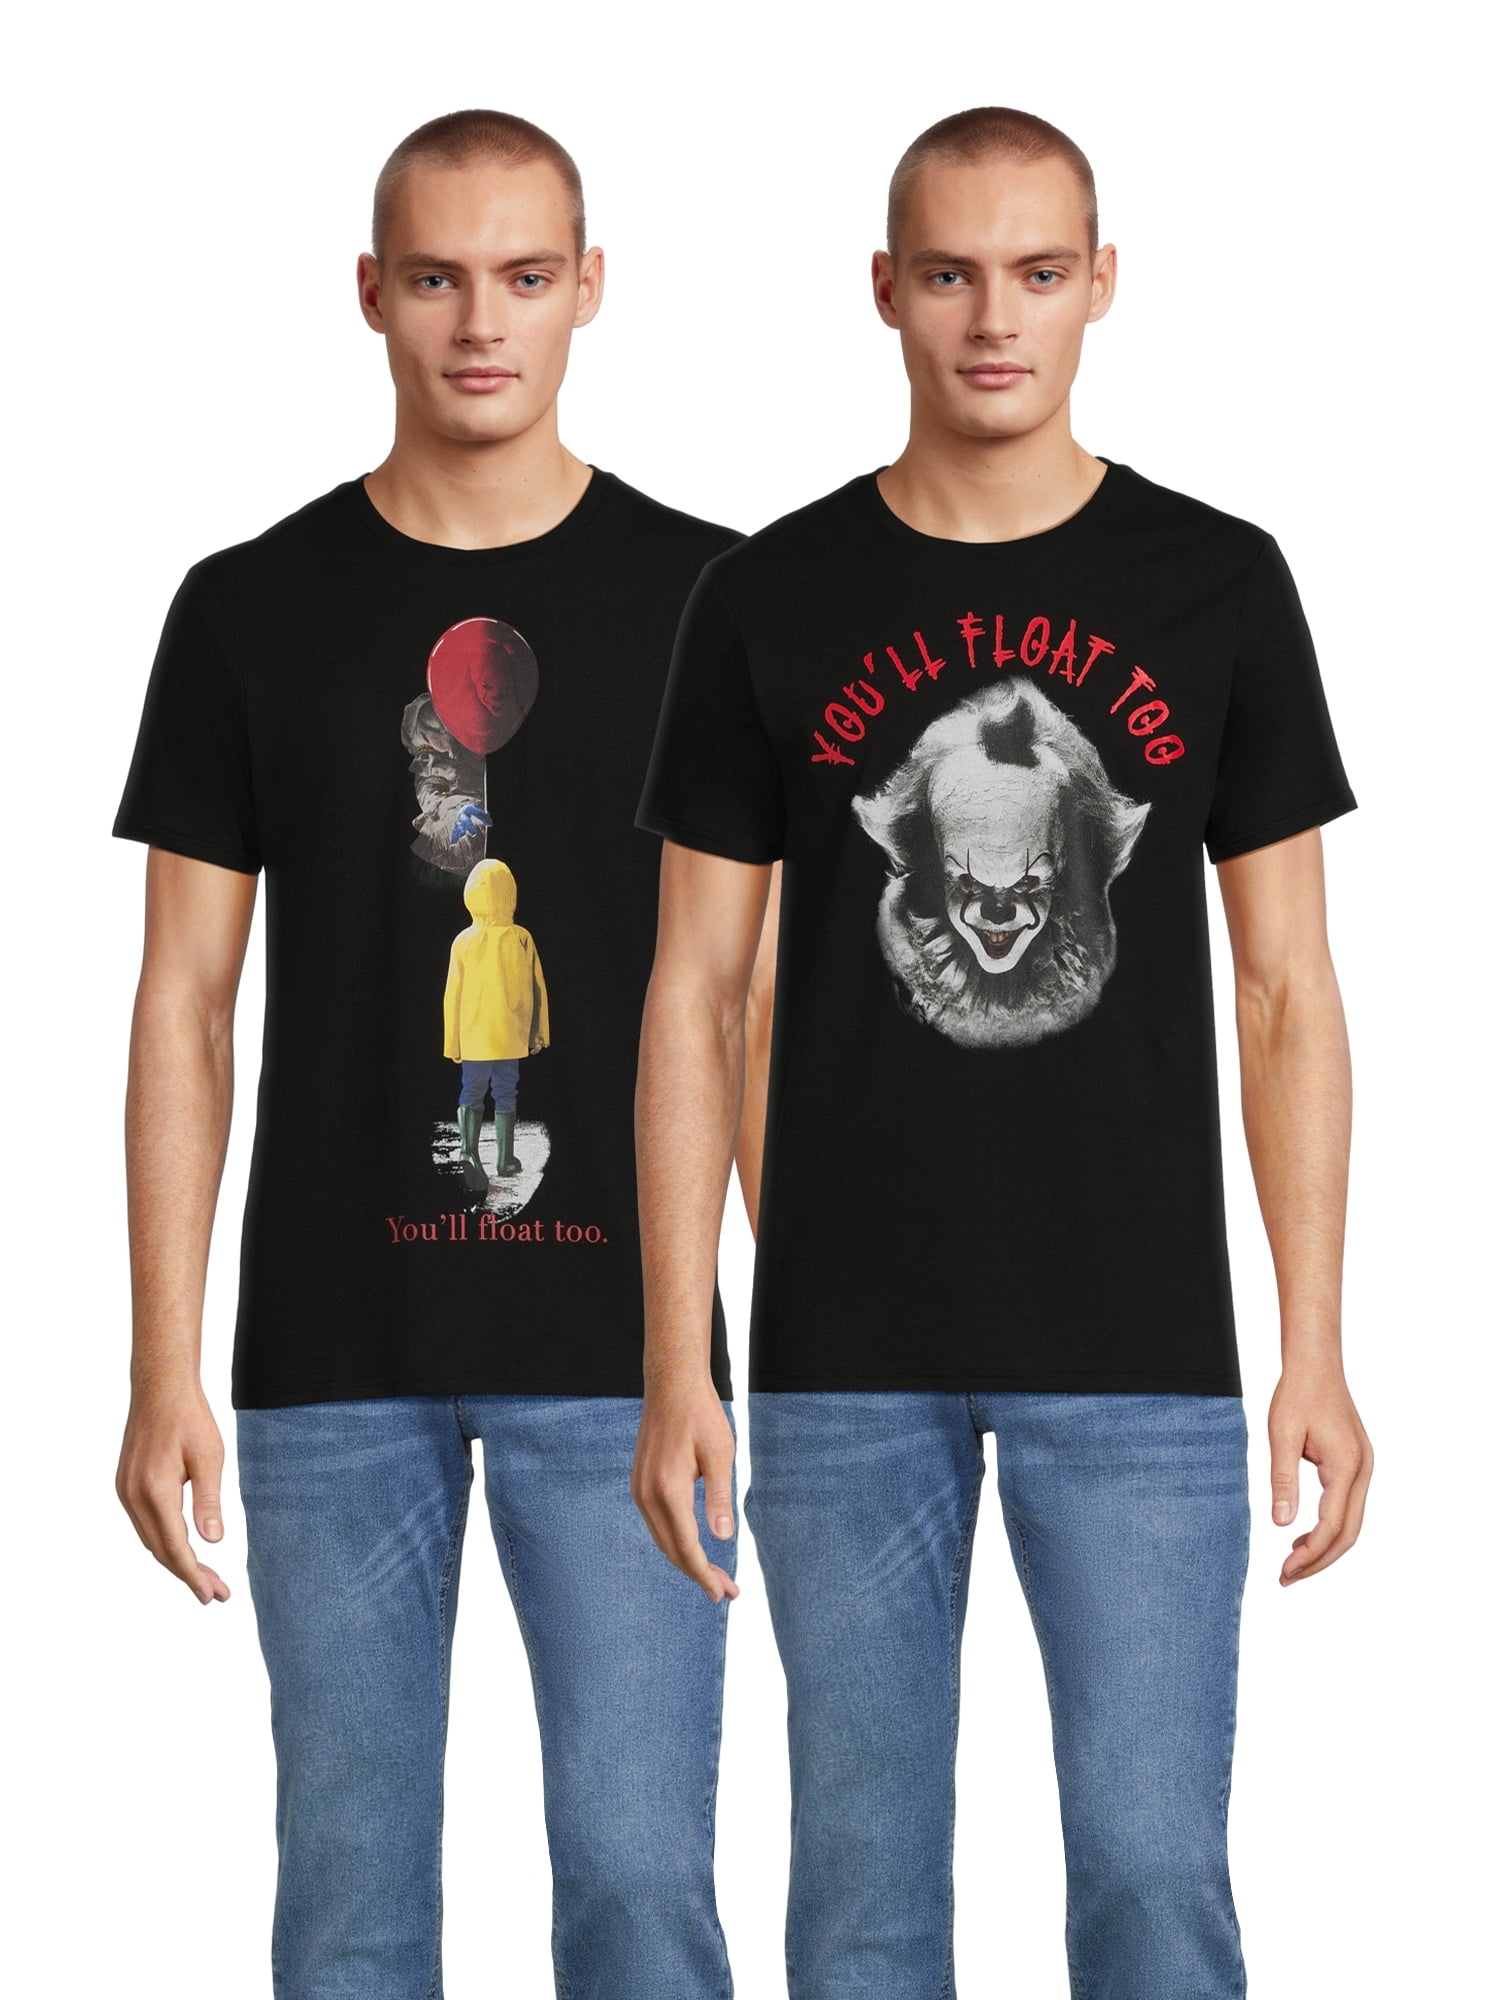 Stephen King Clown It Pennywise Men's and Big Men's Halloween Graphic Tees,  2-Pack, Sizes S-3XL